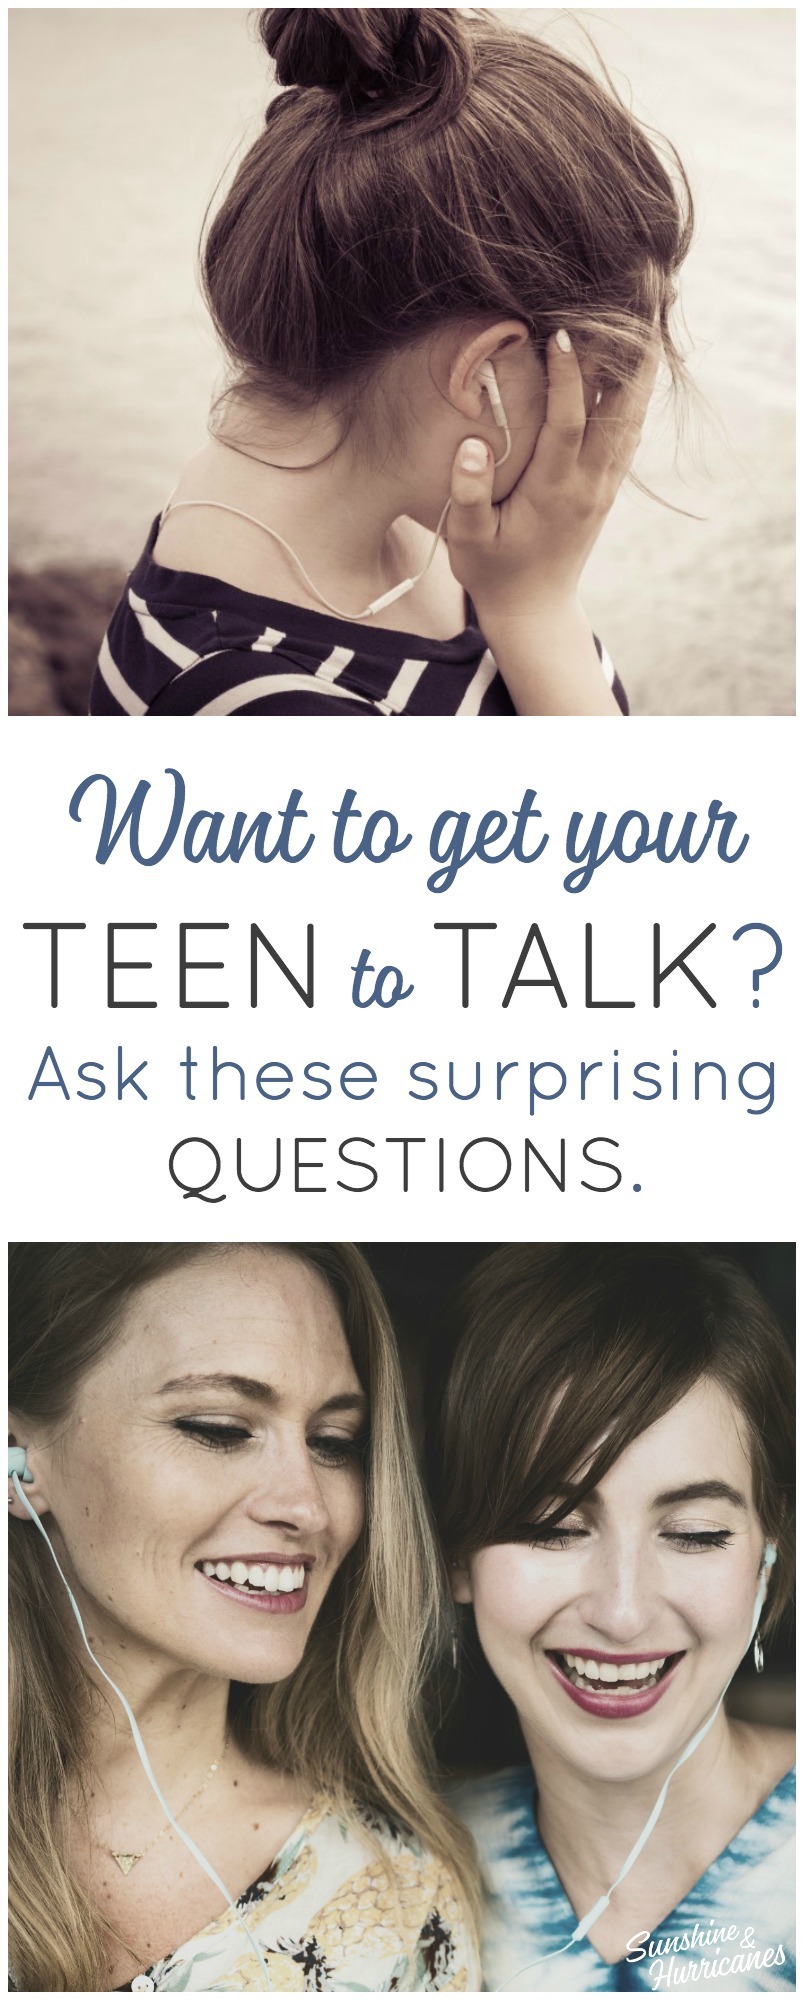 Want to get your teen to talk to you more? Try these surprising questions to get them to open up.